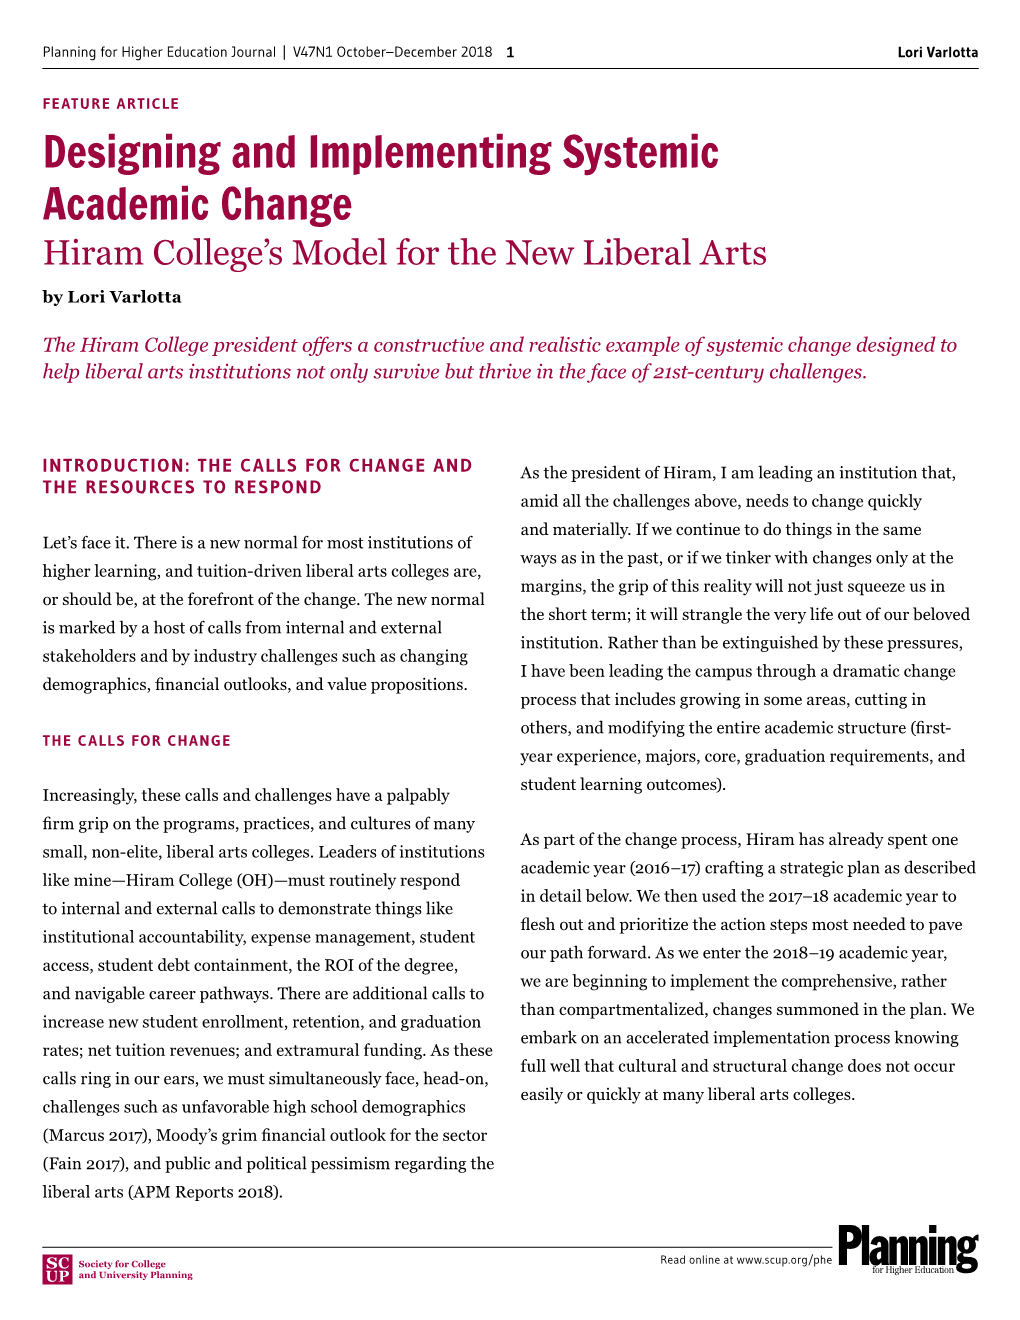 Designing and Implementing Systemic Academic Change Hiram College’S Model for the New Liberal Arts by Lori Varlotta